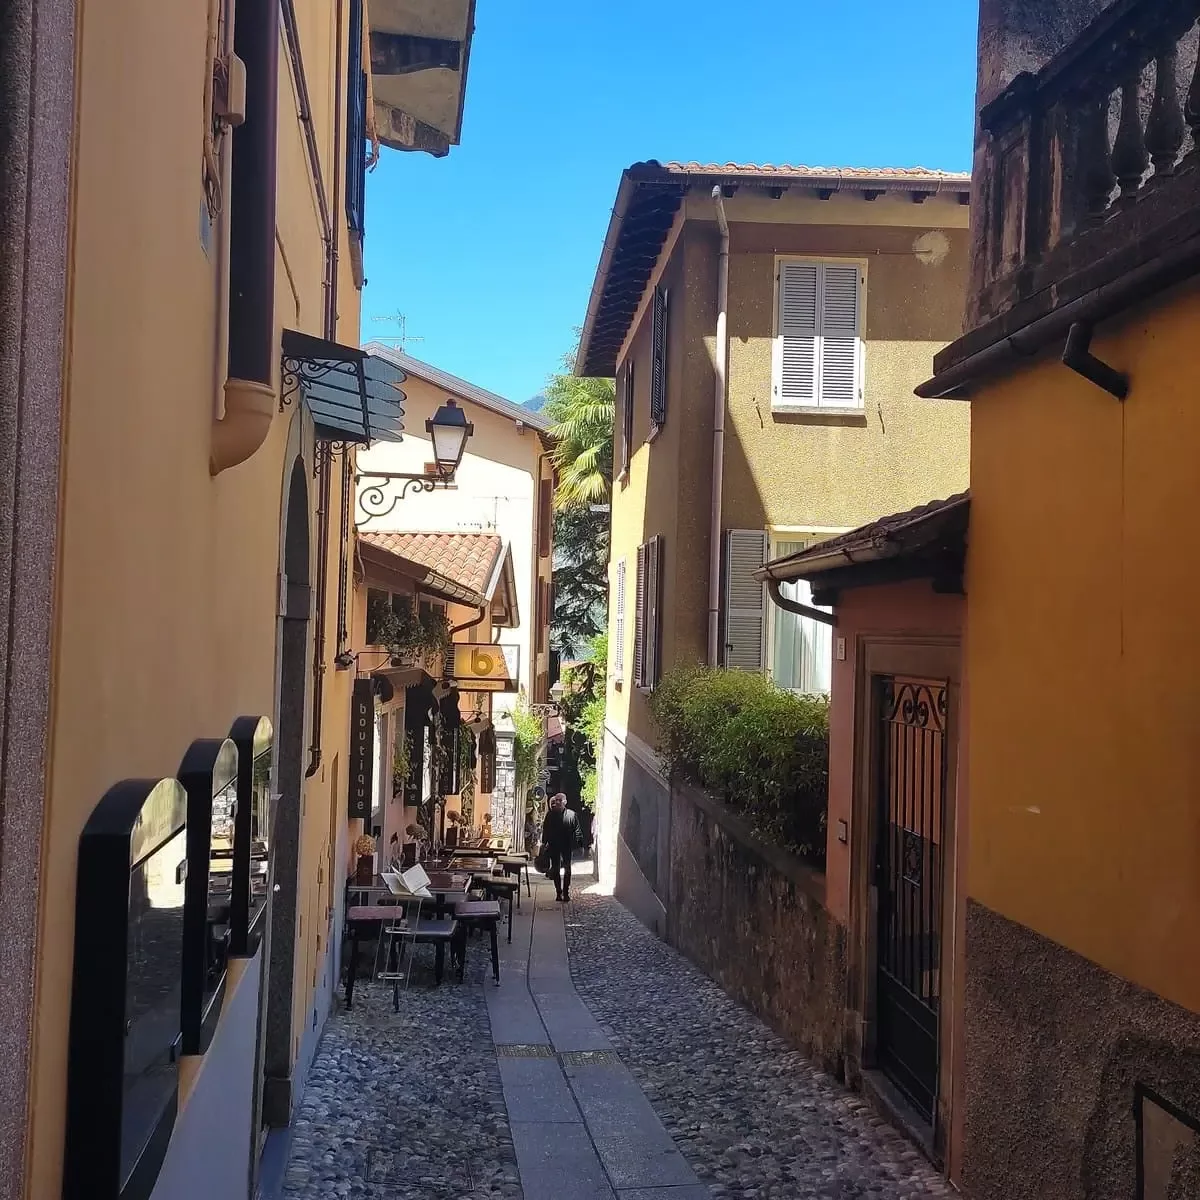 The steep cobblestone alleys of Bellagio are the picture of rustic charme